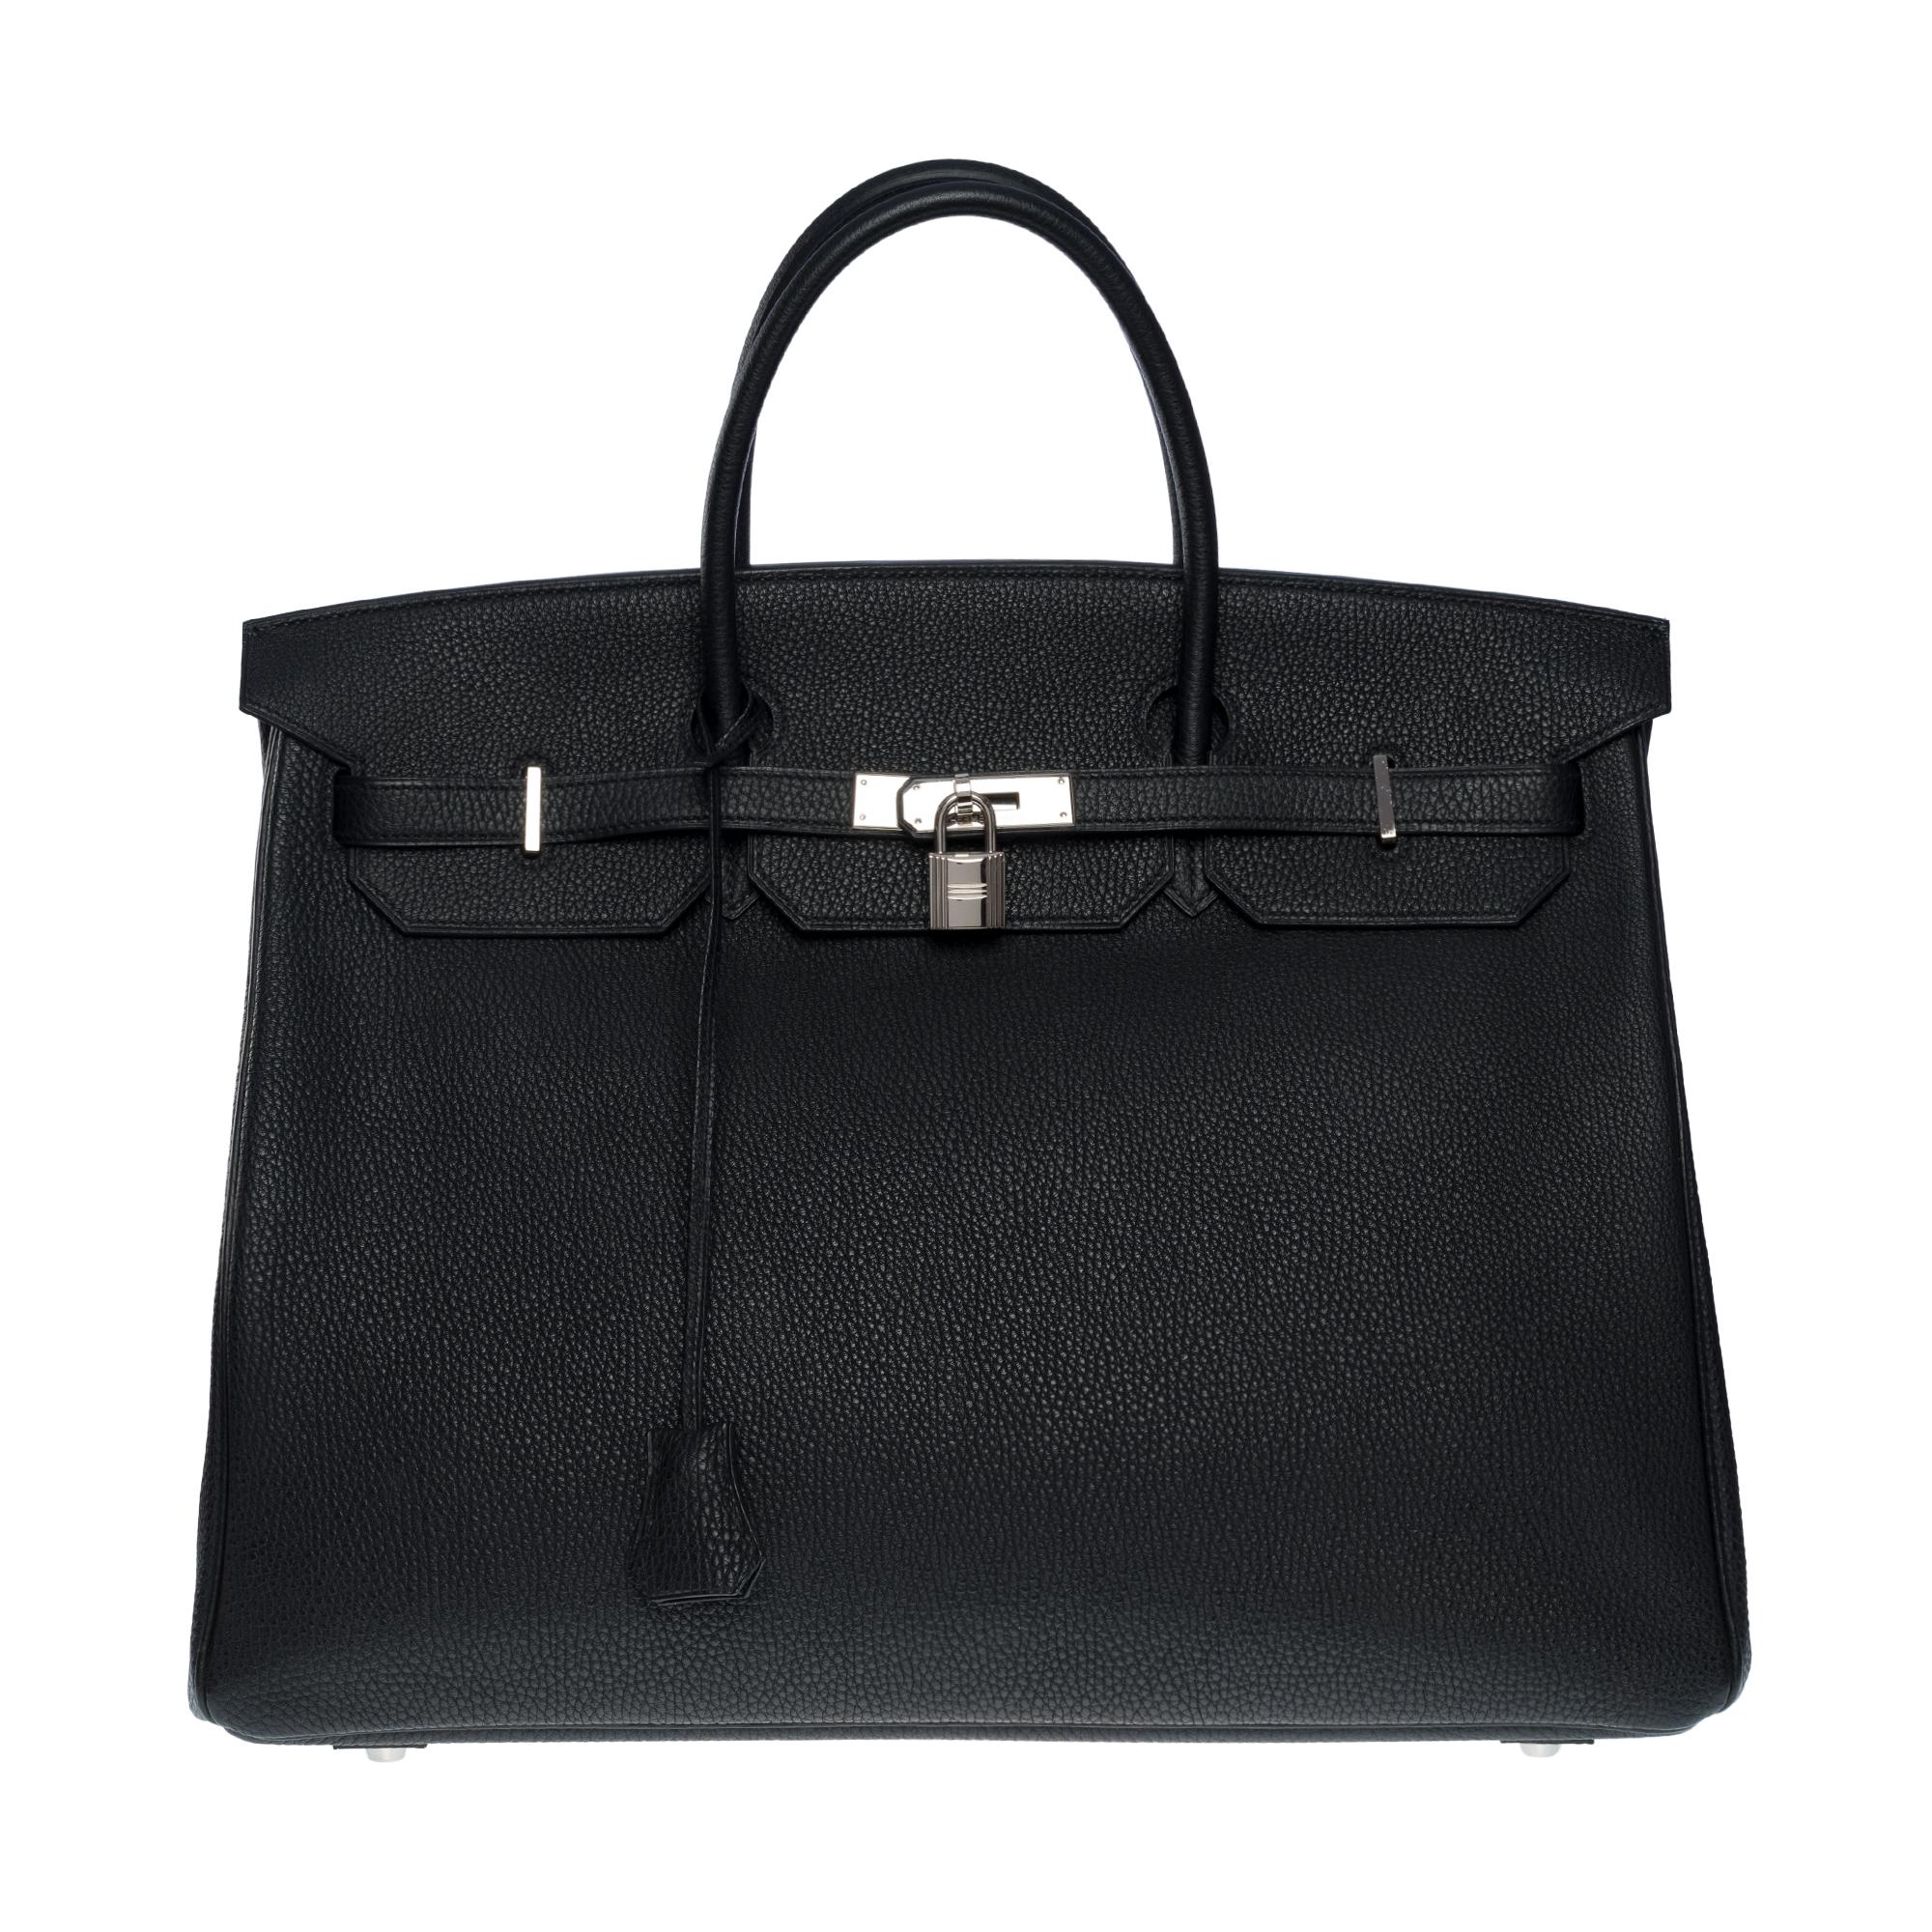 Exceptional Hermes Birkin 40 handbag in black togo leather, palladium silver metal hardware, double black leather handle for a hand carry
Flap closure
Black leather lining, one zippered pocket, one patch pocket
Signature: 